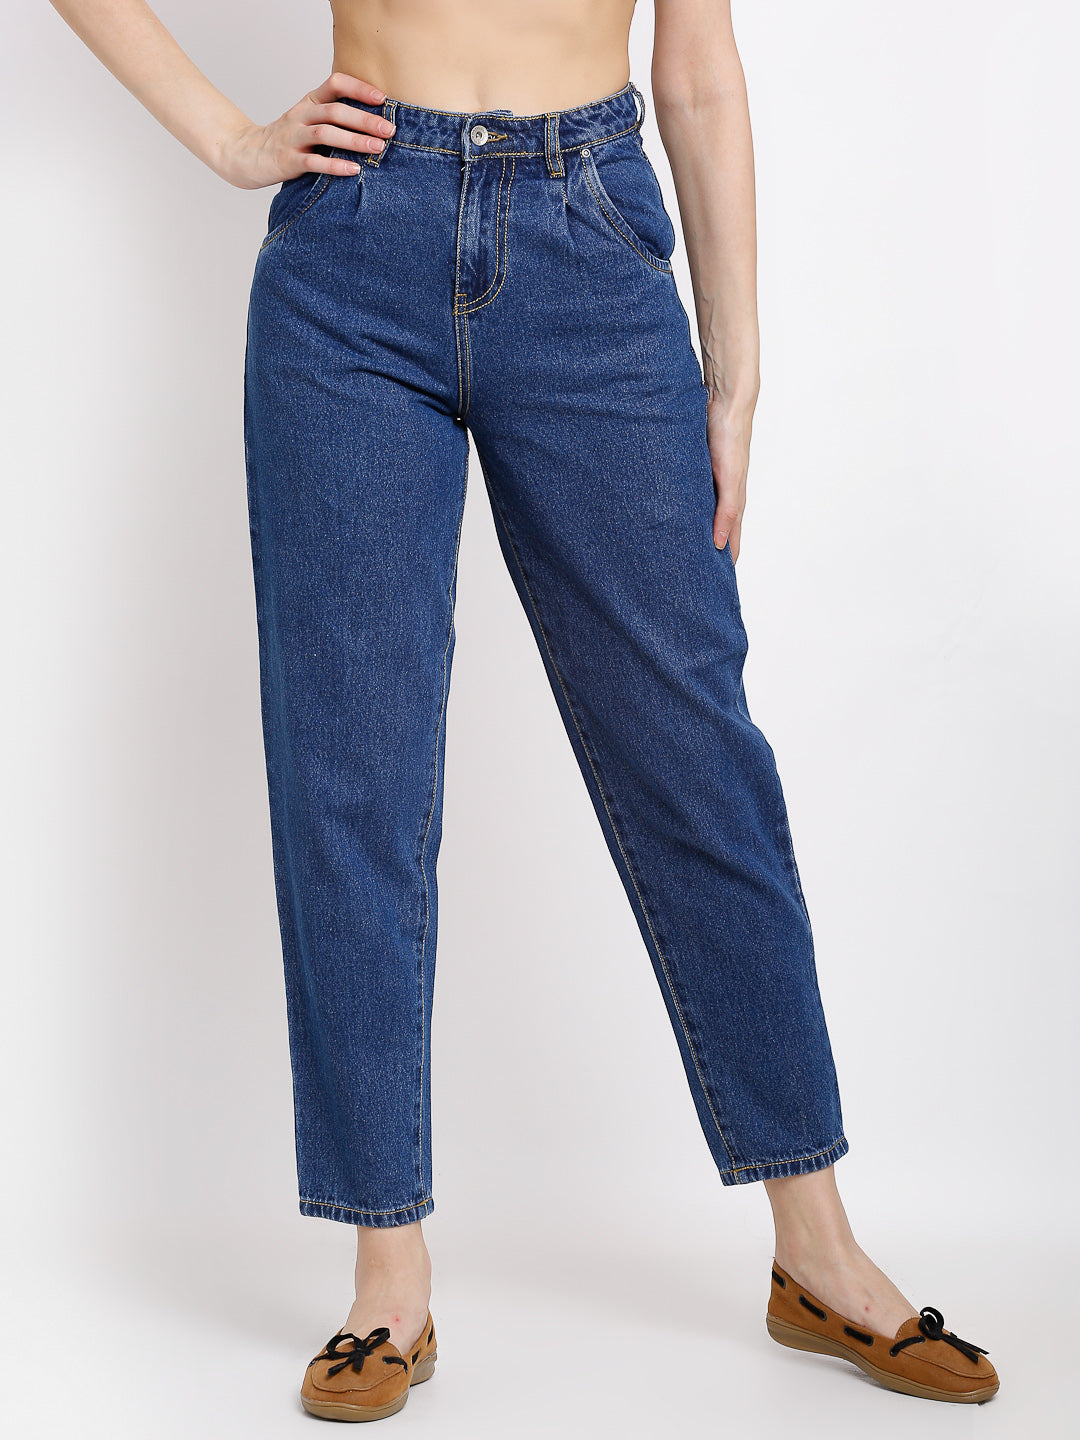 Women Tapered Fit Ankle Length Blue Jeans